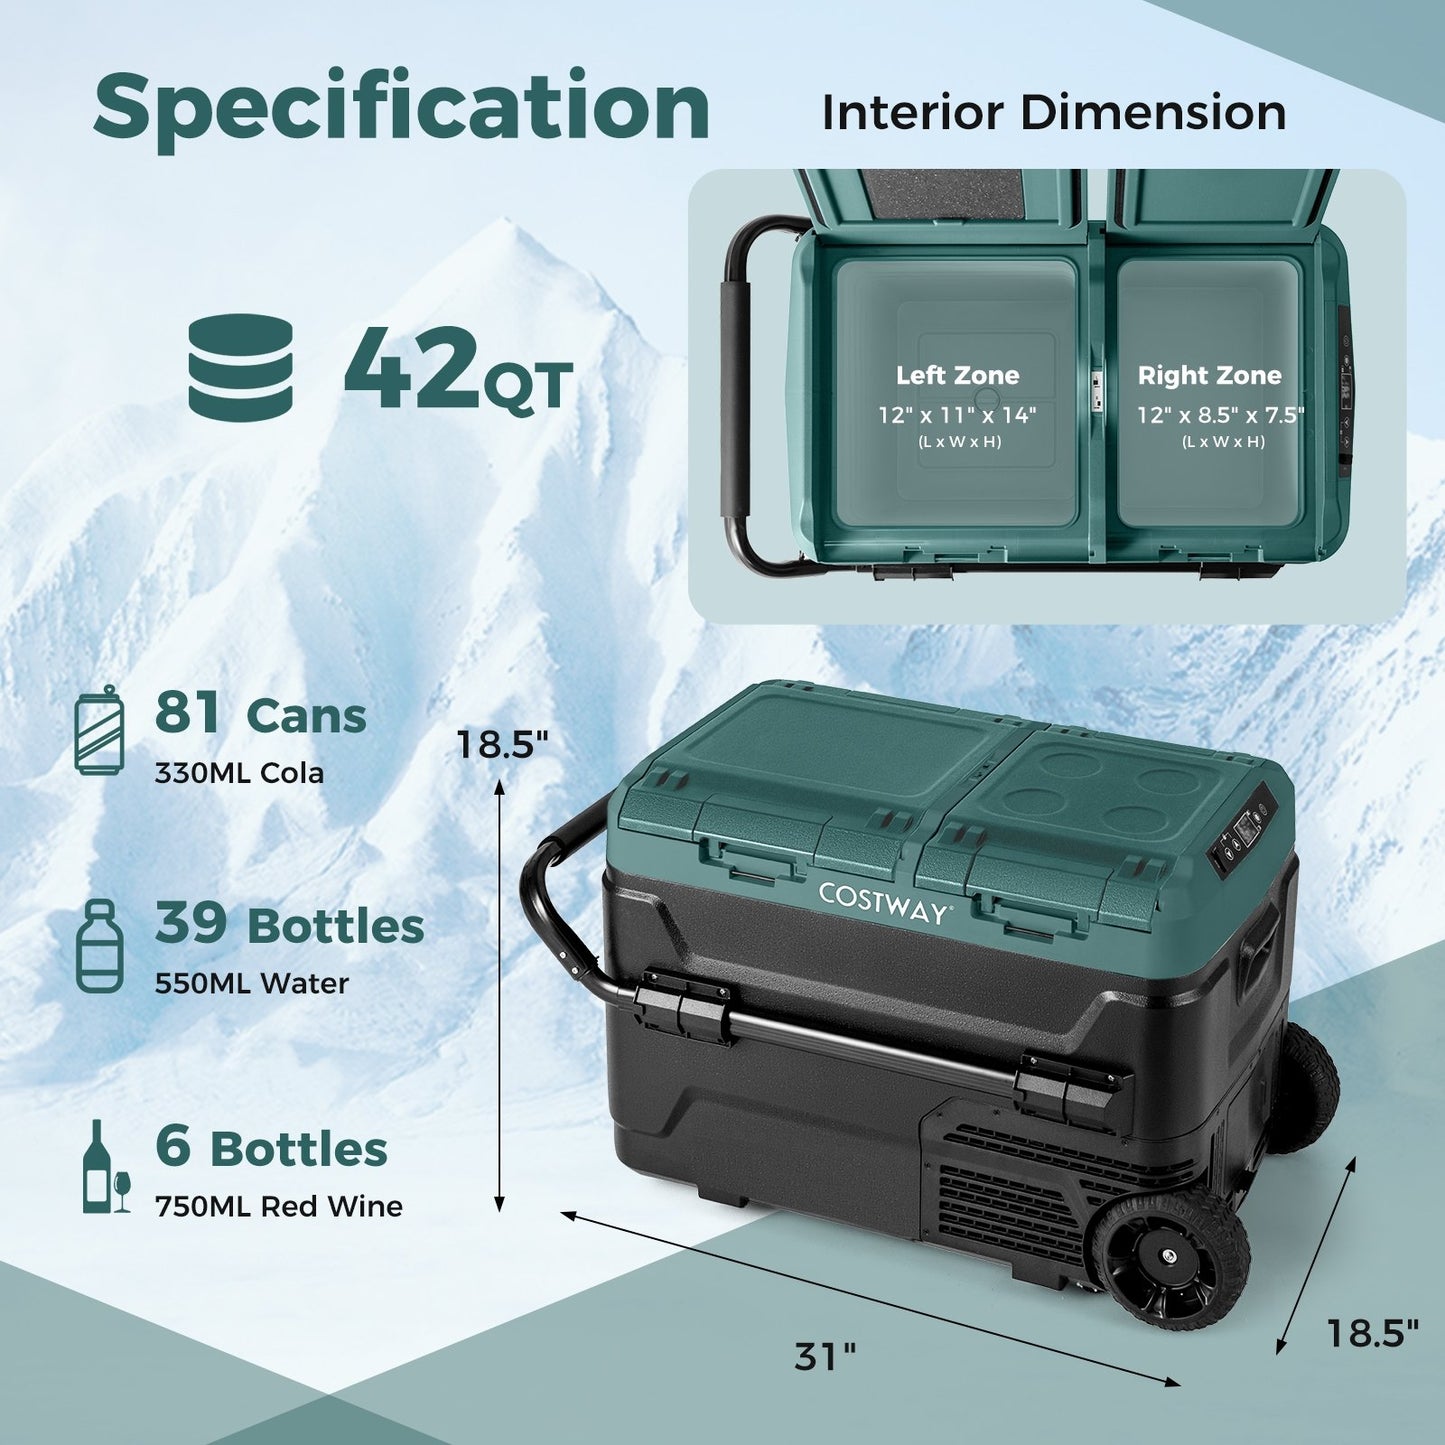 Dual Zone 12V  42QT Car Refrigerator for Vehicles Camping Travel Truck RV Boat Outdoor and Home Use, Green